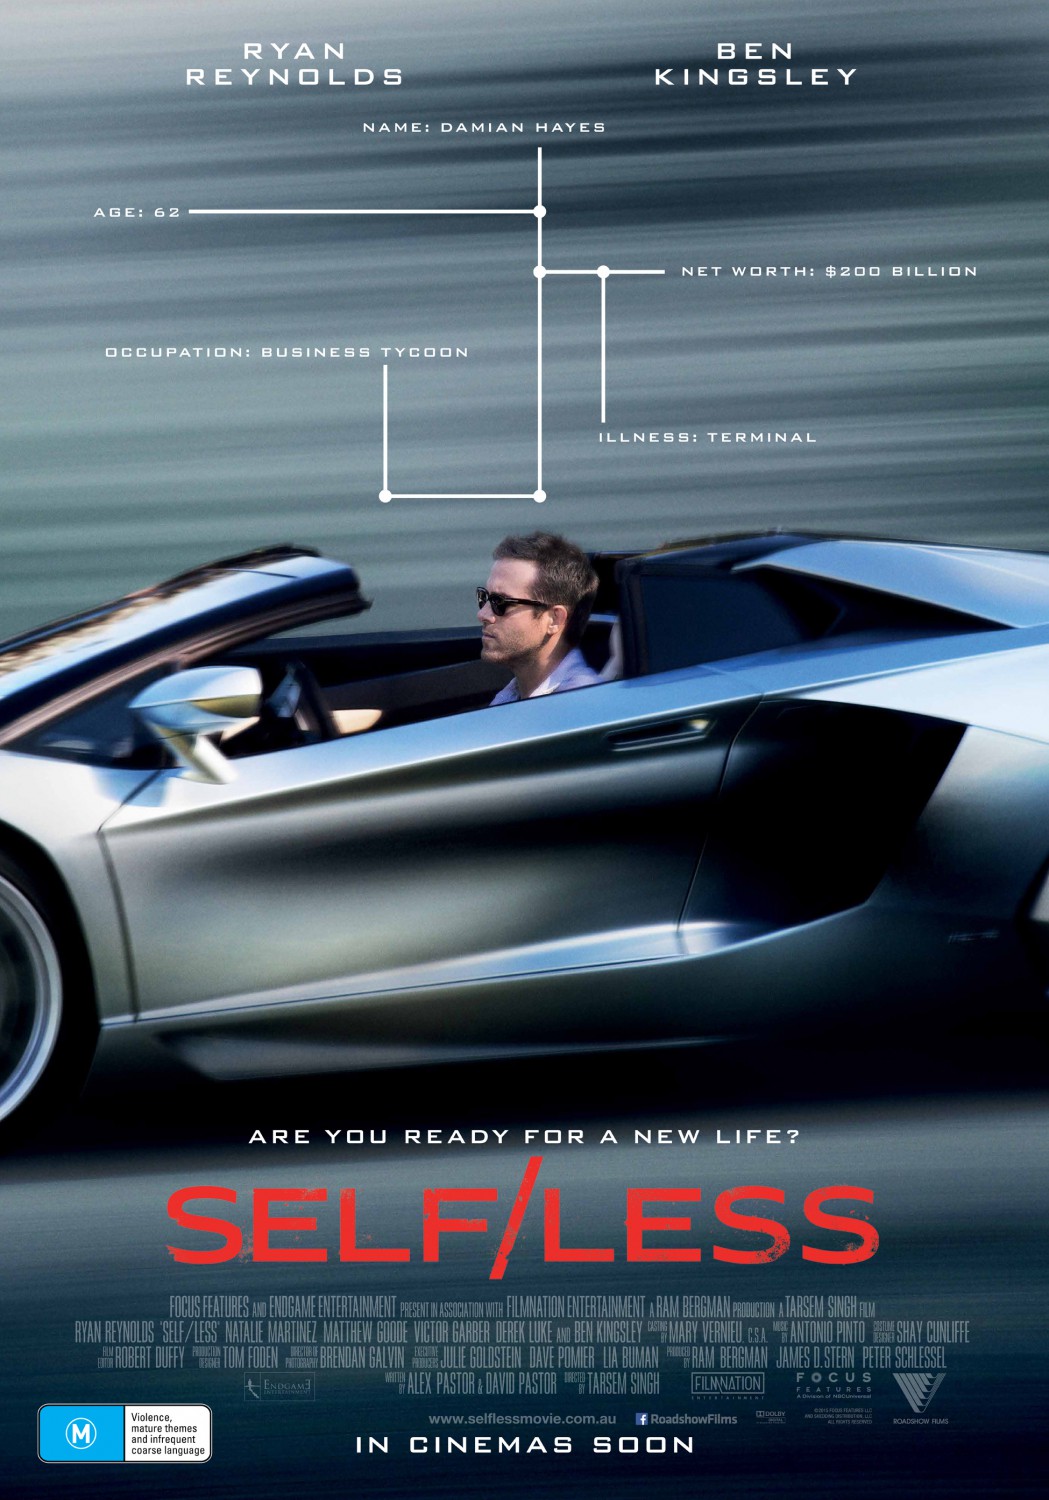 Extra Large Movie Poster Image for Self/less (#7 of 7)